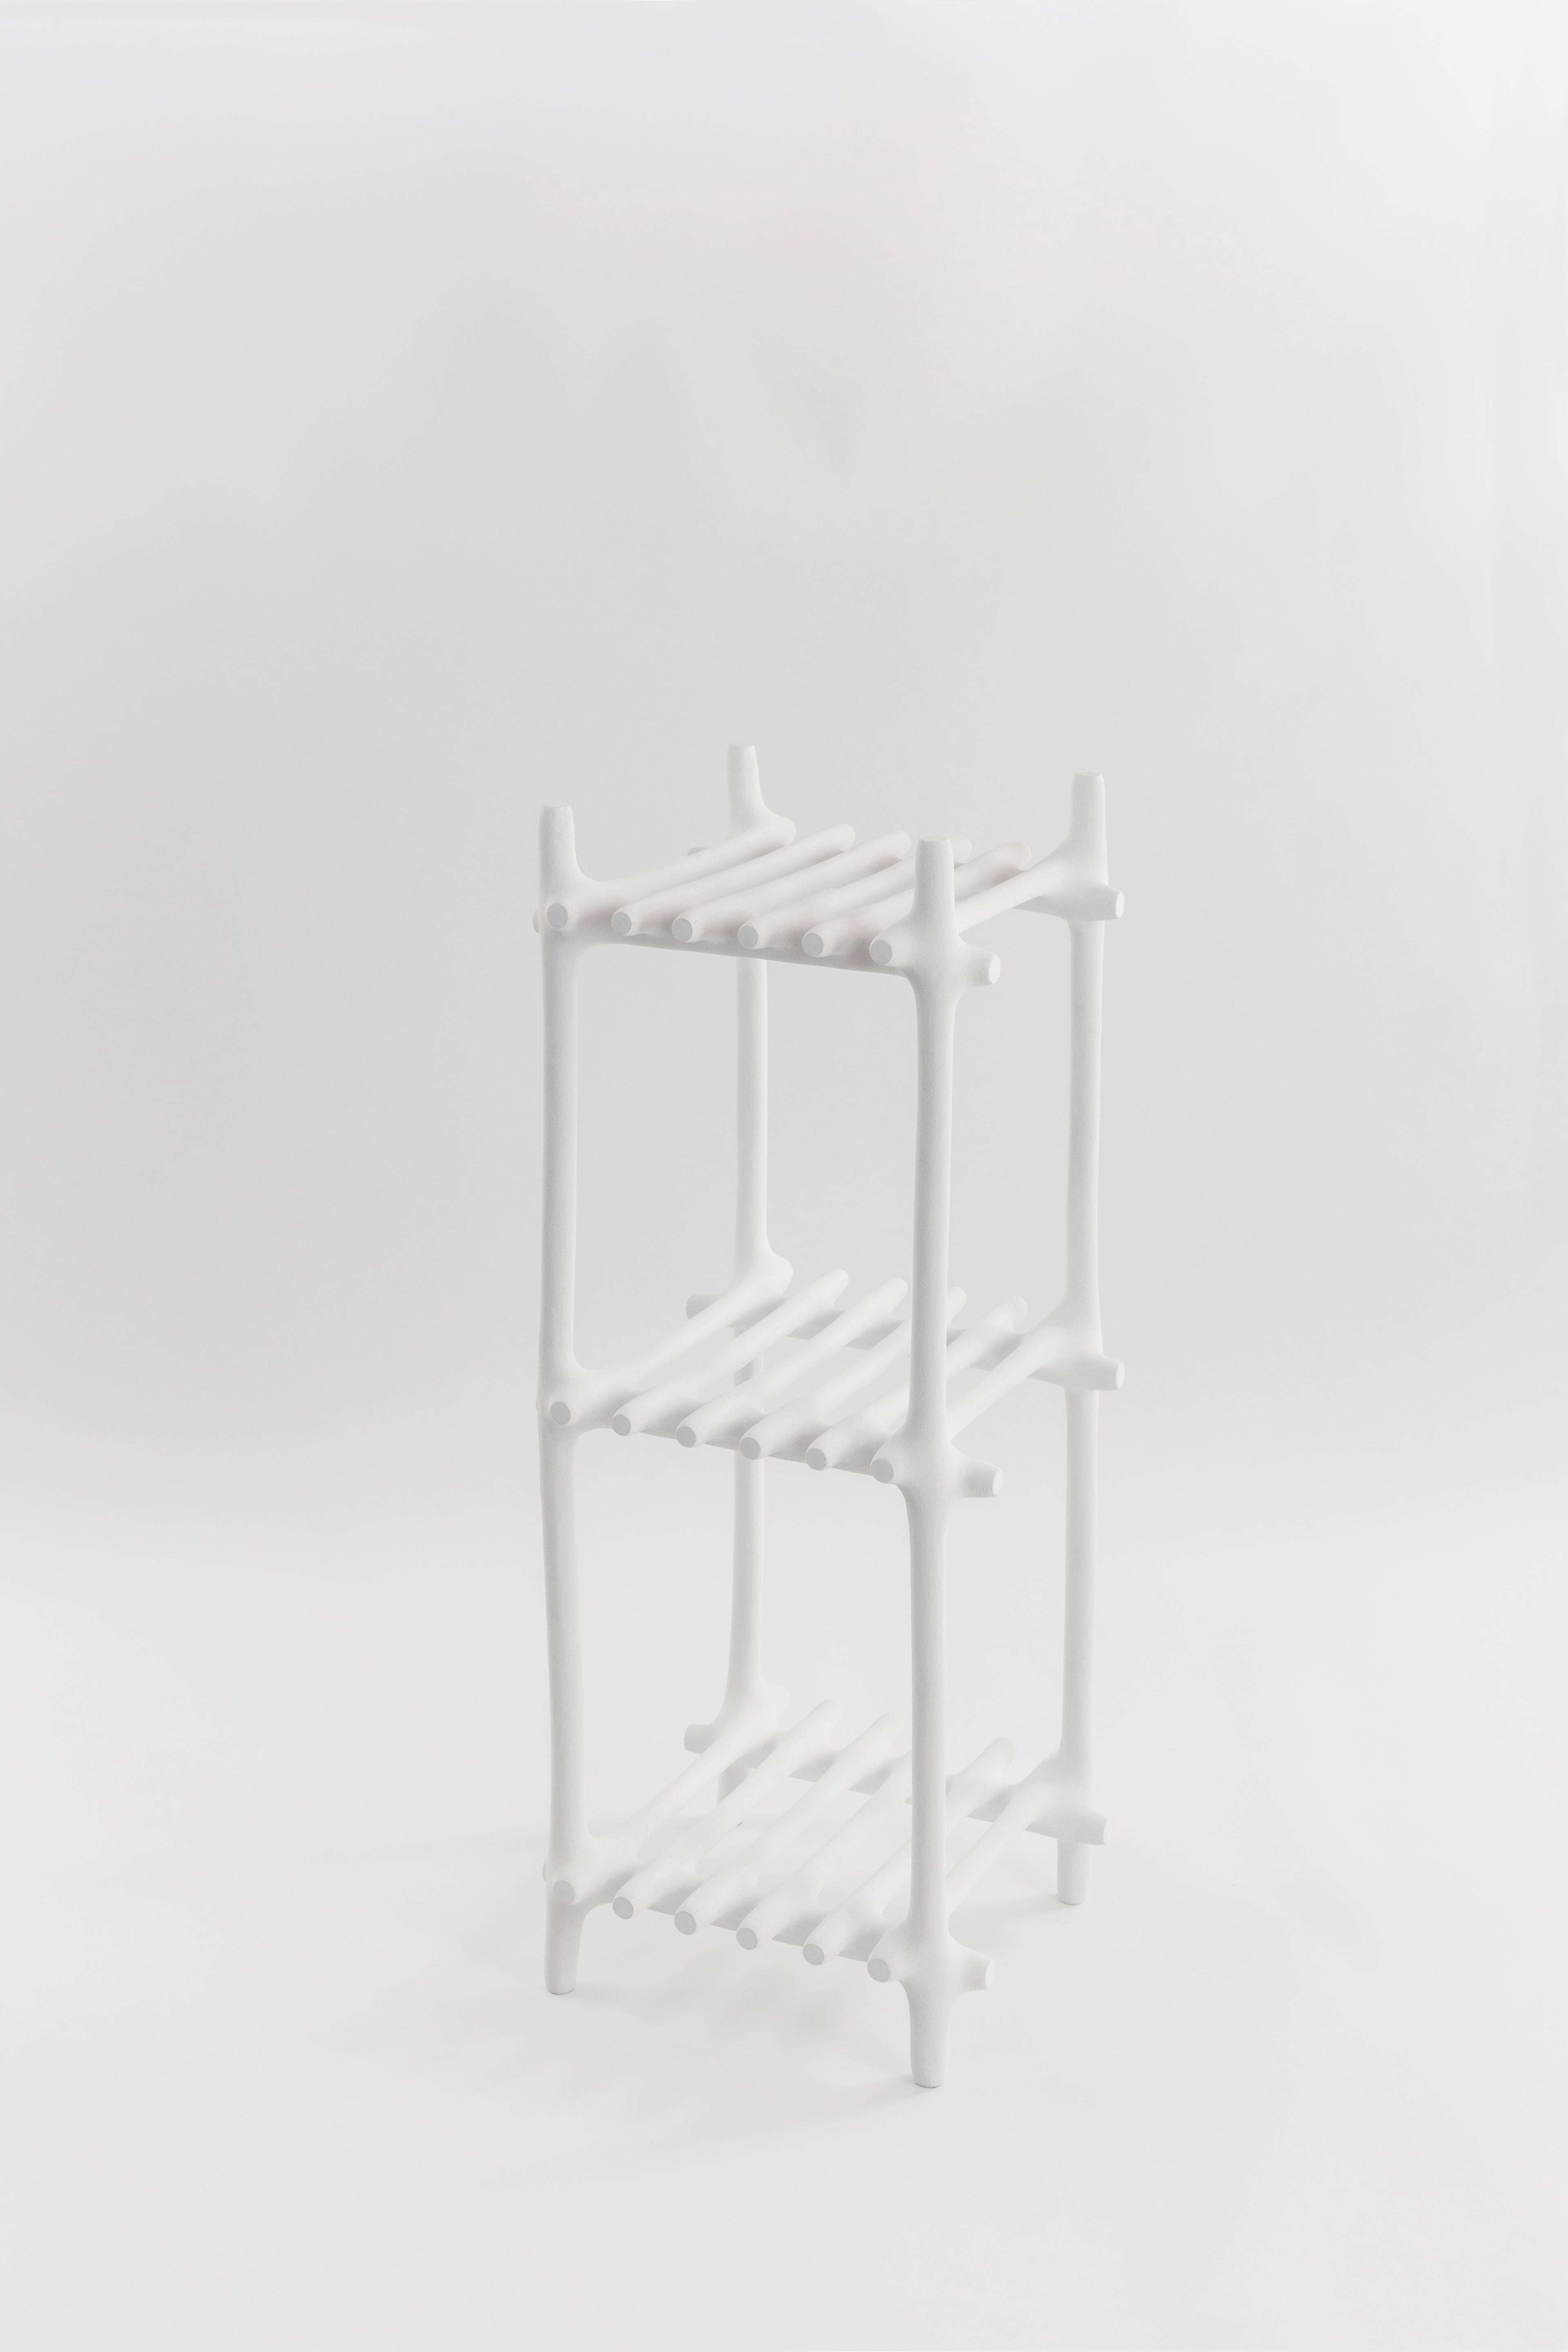 Basic shelf by HWE
Limited edition
Materials: Waste SLS 3D nylon powder, Sand from sustainable sources
Dimensions: H 112 x W 42 x D 42 cm 
Colour: white

Hot Wire Extensions is a young sustainable design brand, presenting a bold innovative